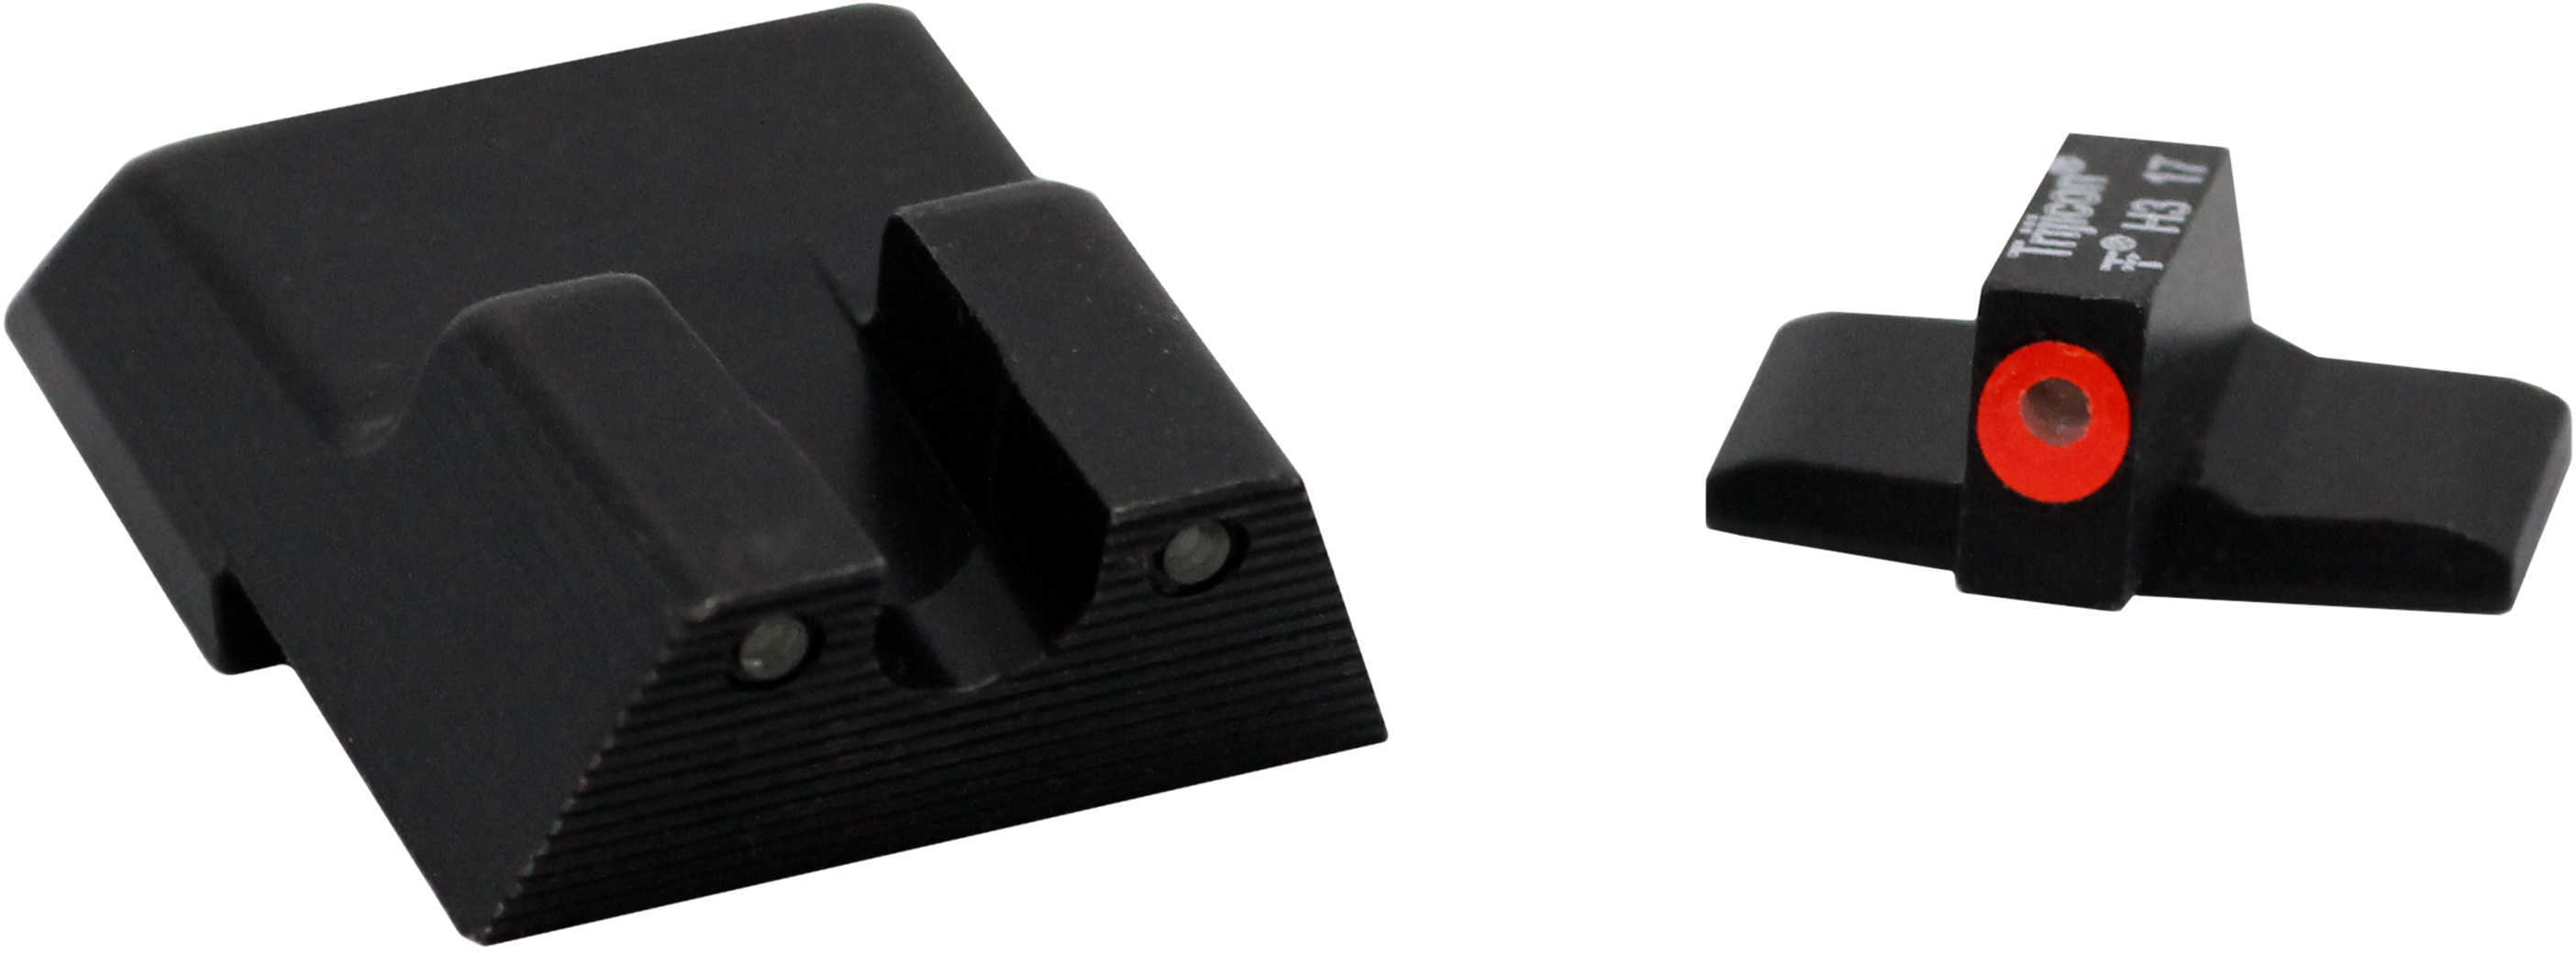 HD XR Night Sights For H&K